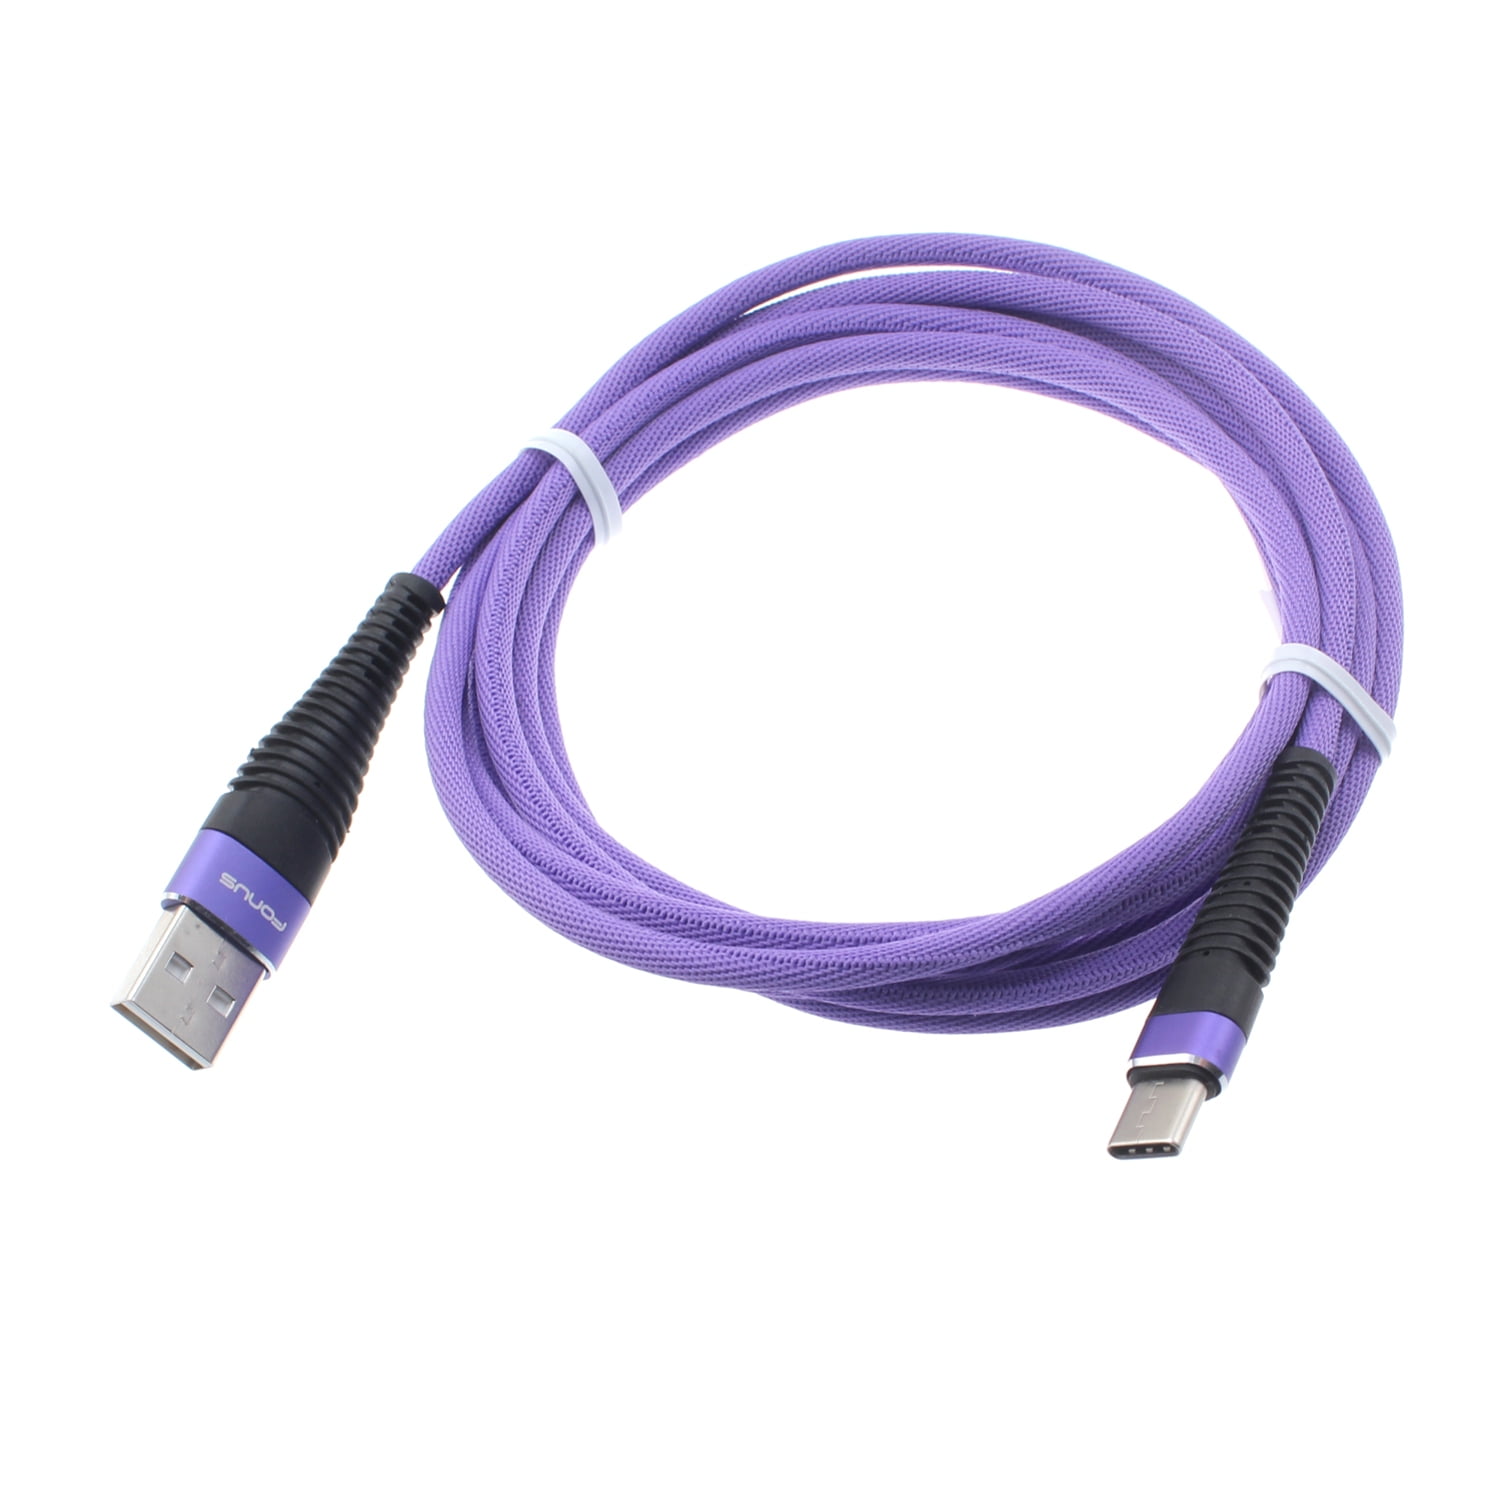 6ft USB for Samsung Galaxy A50/A20/A10e - Purple Type-C Charger Cord Power Wire USB-C Long B5G - Walmart.com